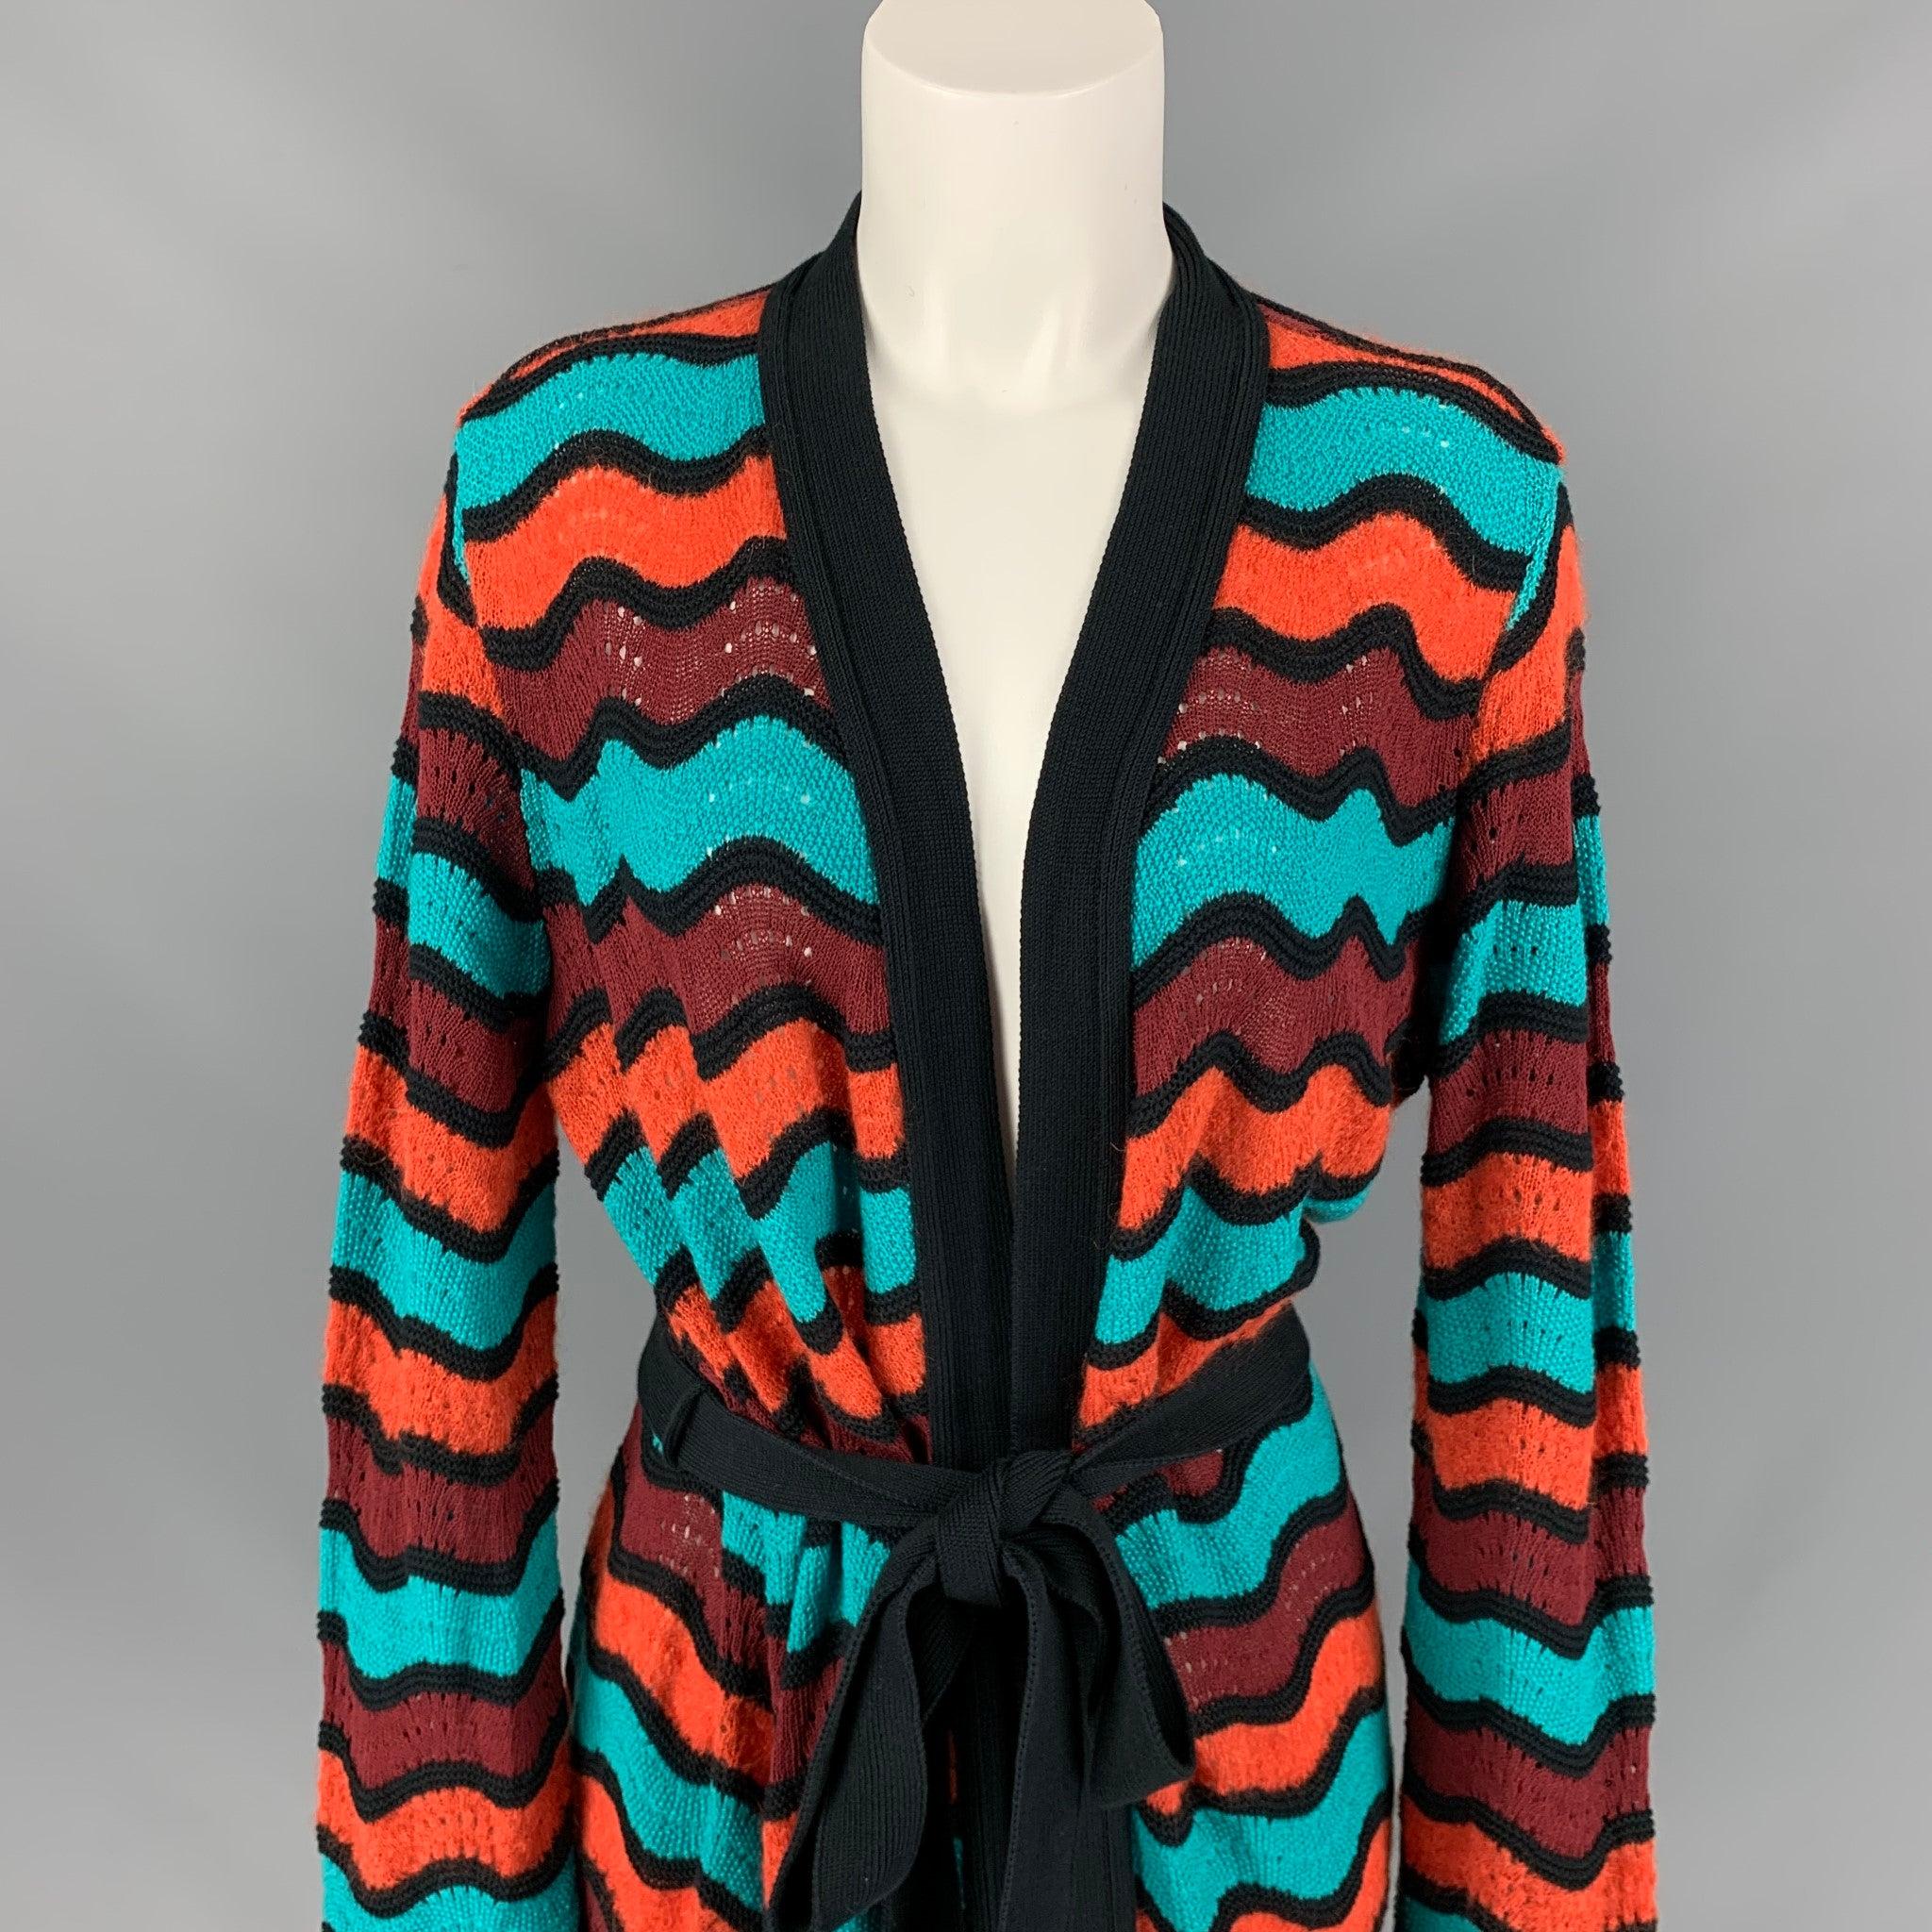 M MISSONI coat comes in a multi-color knitted stripe wool blend featuring a belted style. Made in Italy.
Very Good
Pre-Owned Condition. 

Marked:  46 

Measurements: 
 
Shoulder: 18 inches Bust: 44 inches Sleeve: 27 inches Length: 39 inches 
 
 
